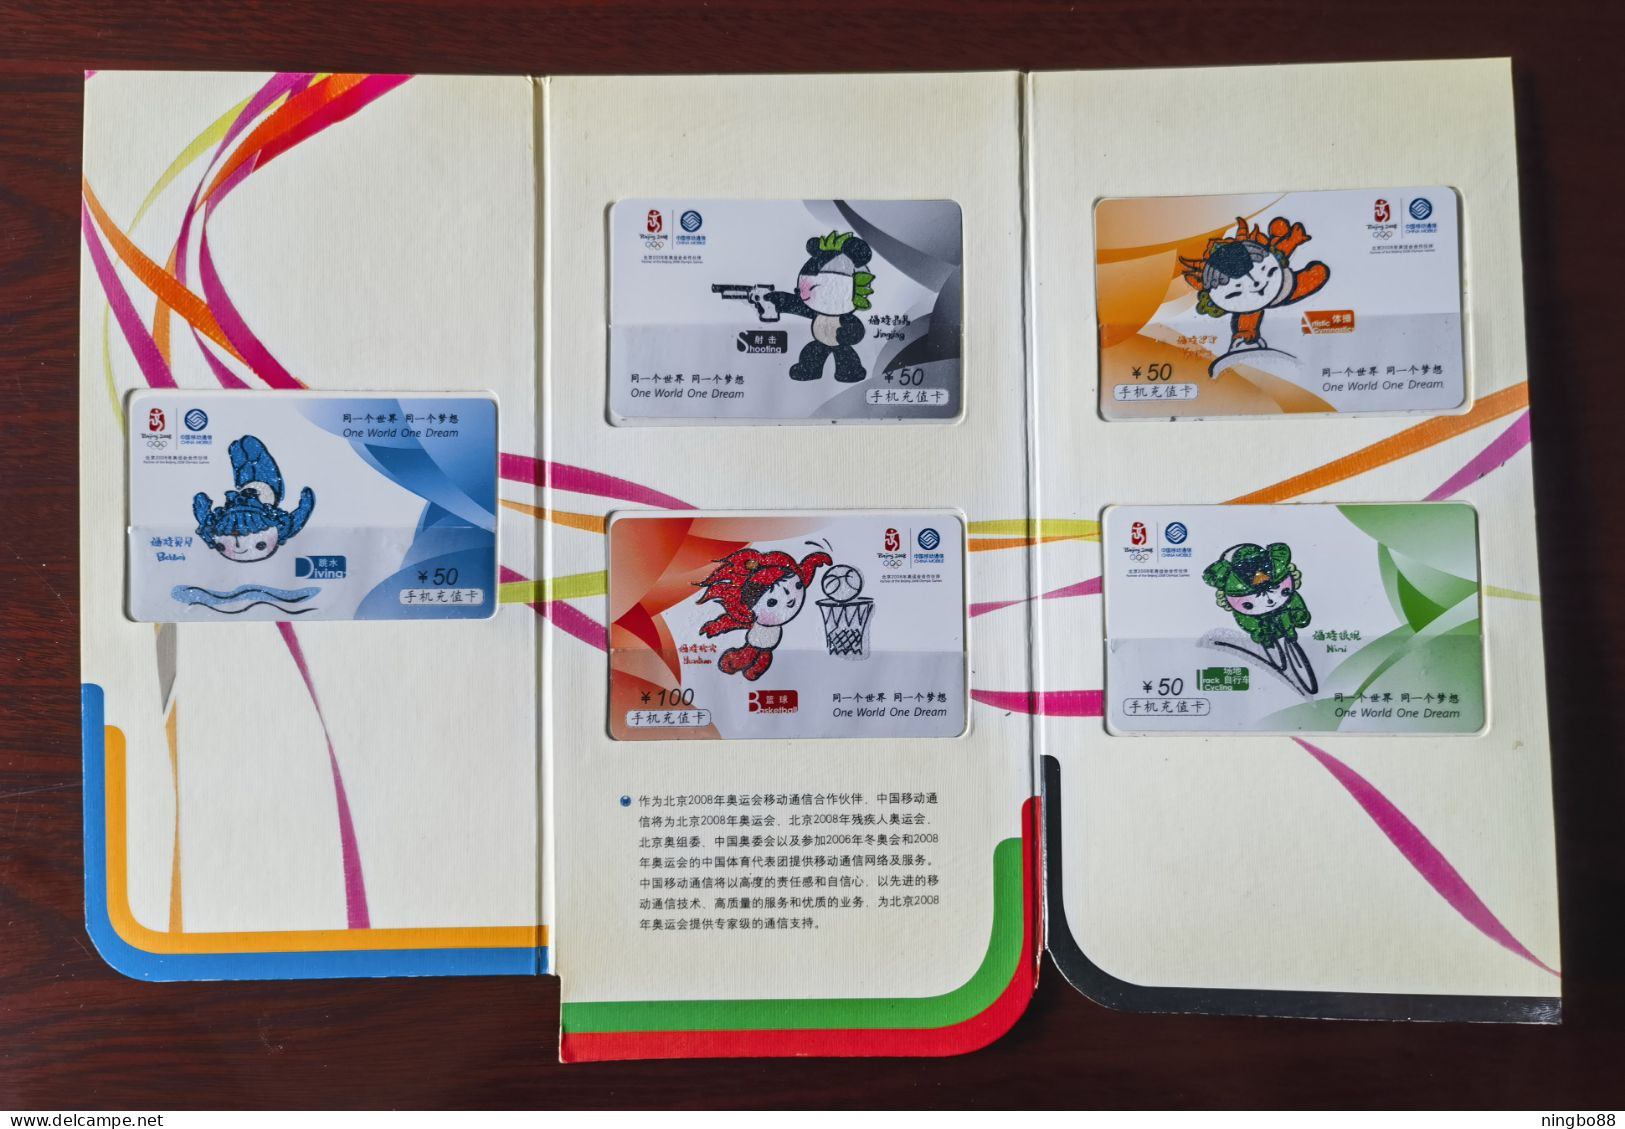 China 2008 Set Of 5 Beijing 2008 Olympic Games Mascot Fuwa Top-up Cards In Fold,used - Jeux Olympiques